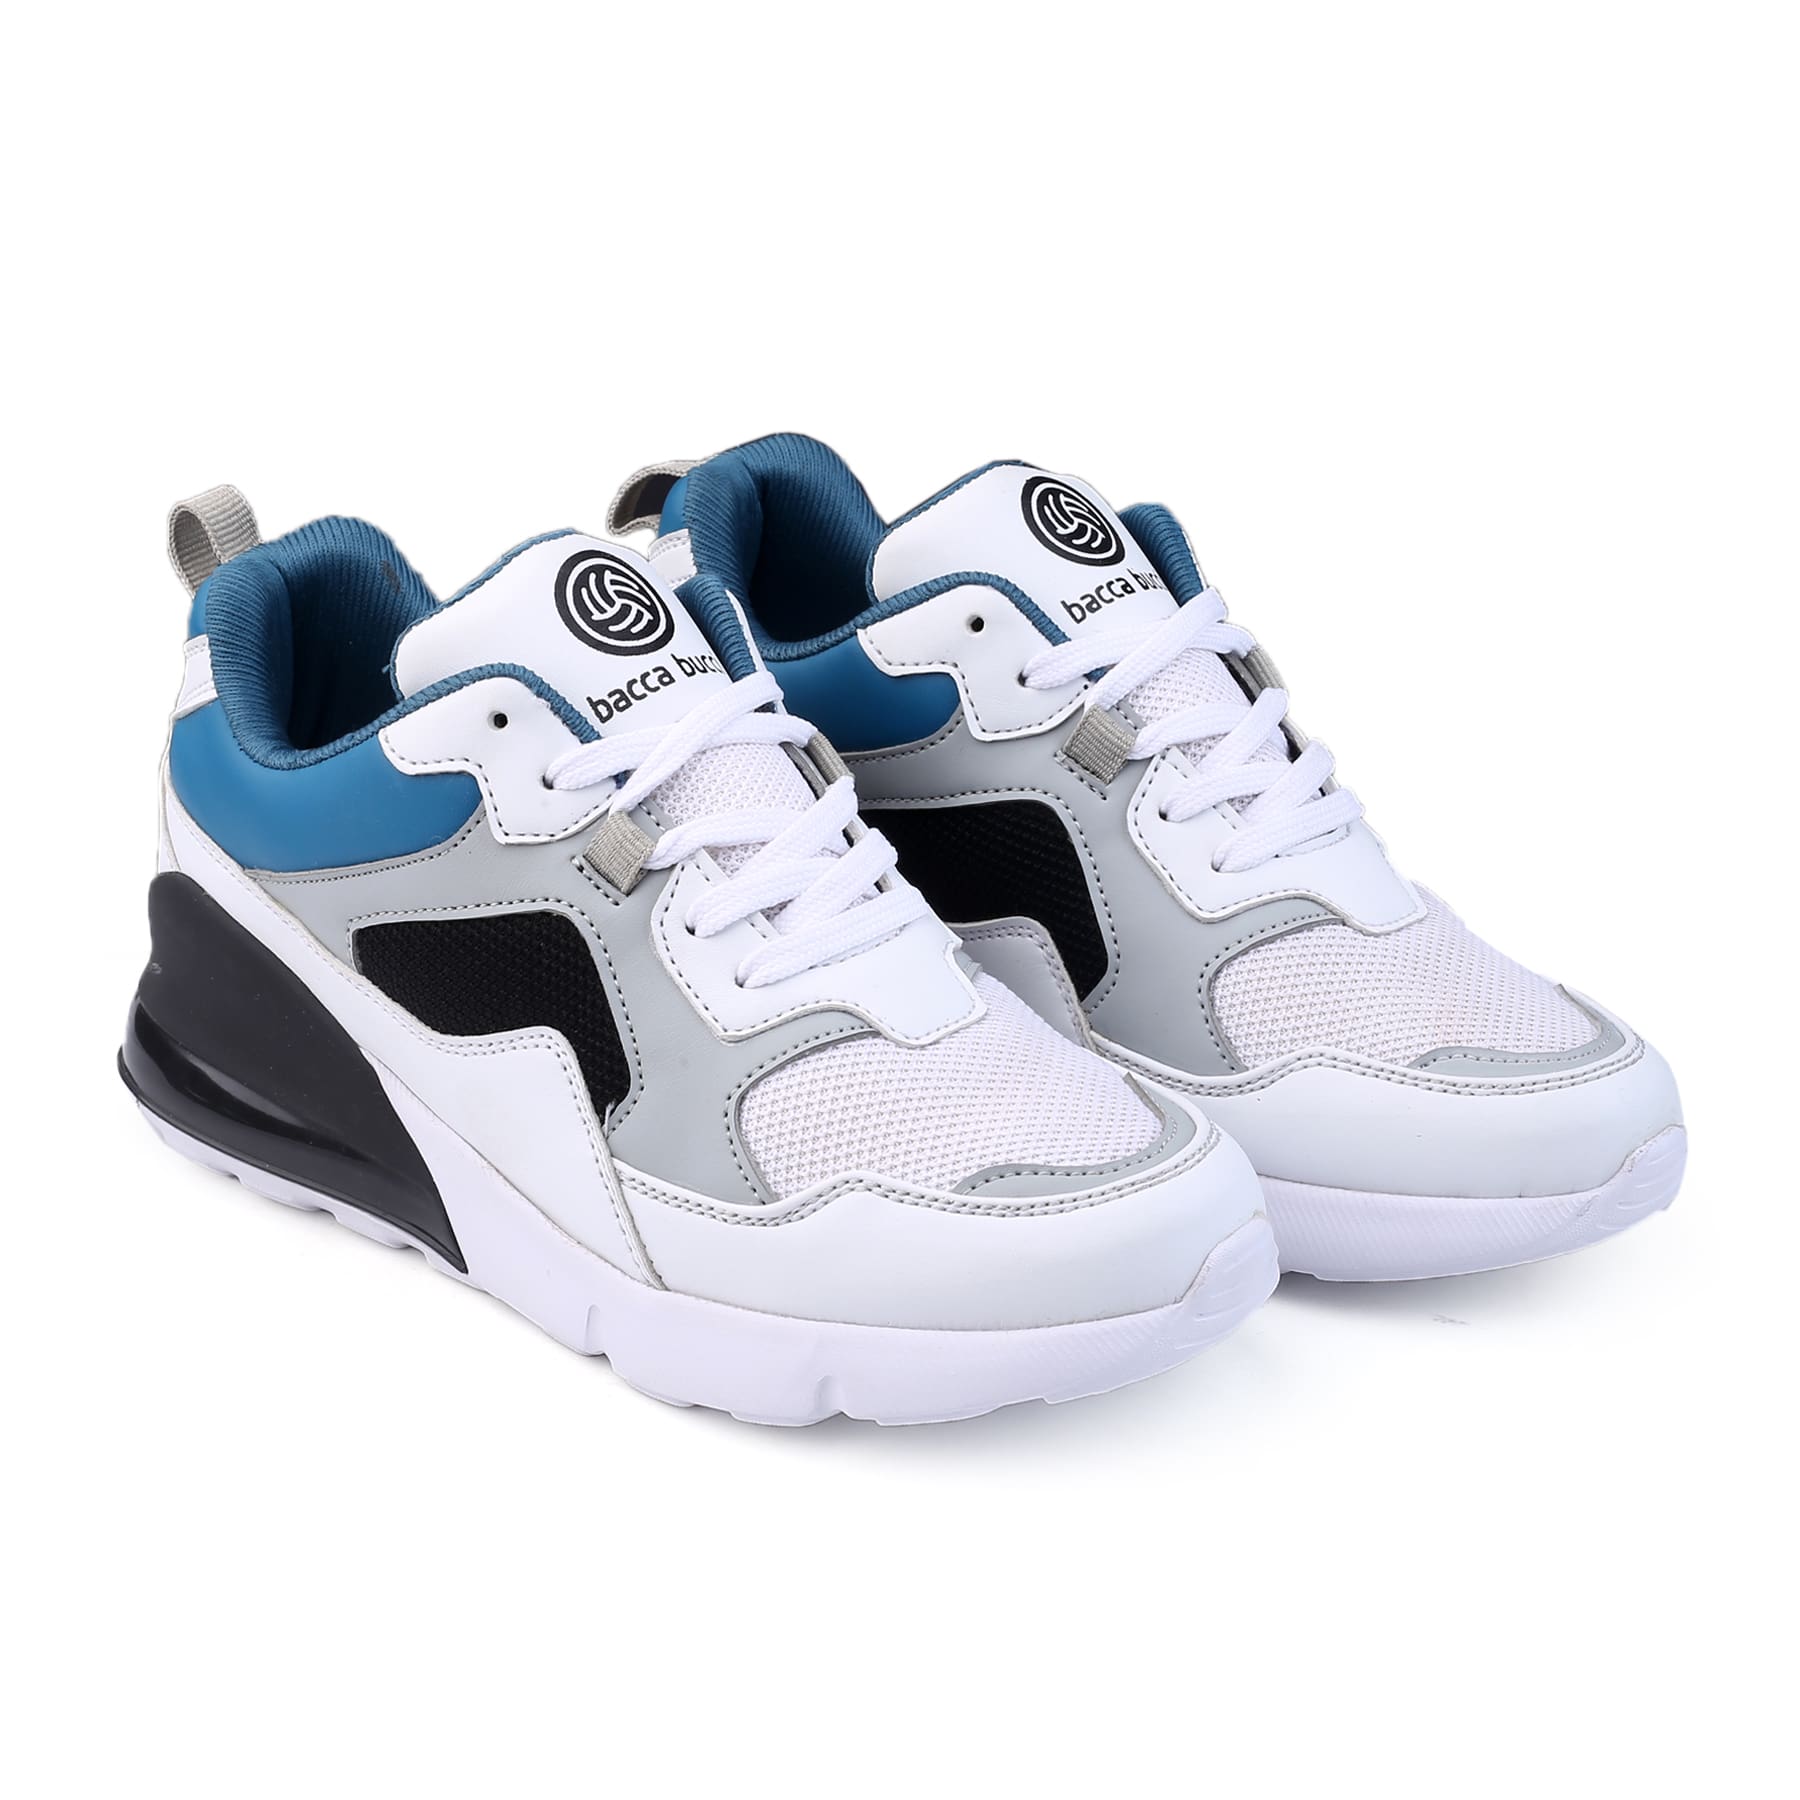 Bacca Bucci Boys or Girls Urban Retro Blocked Fashions Sneakers for Walking Running Partying & Fun (Age : 8 to 12 Years)